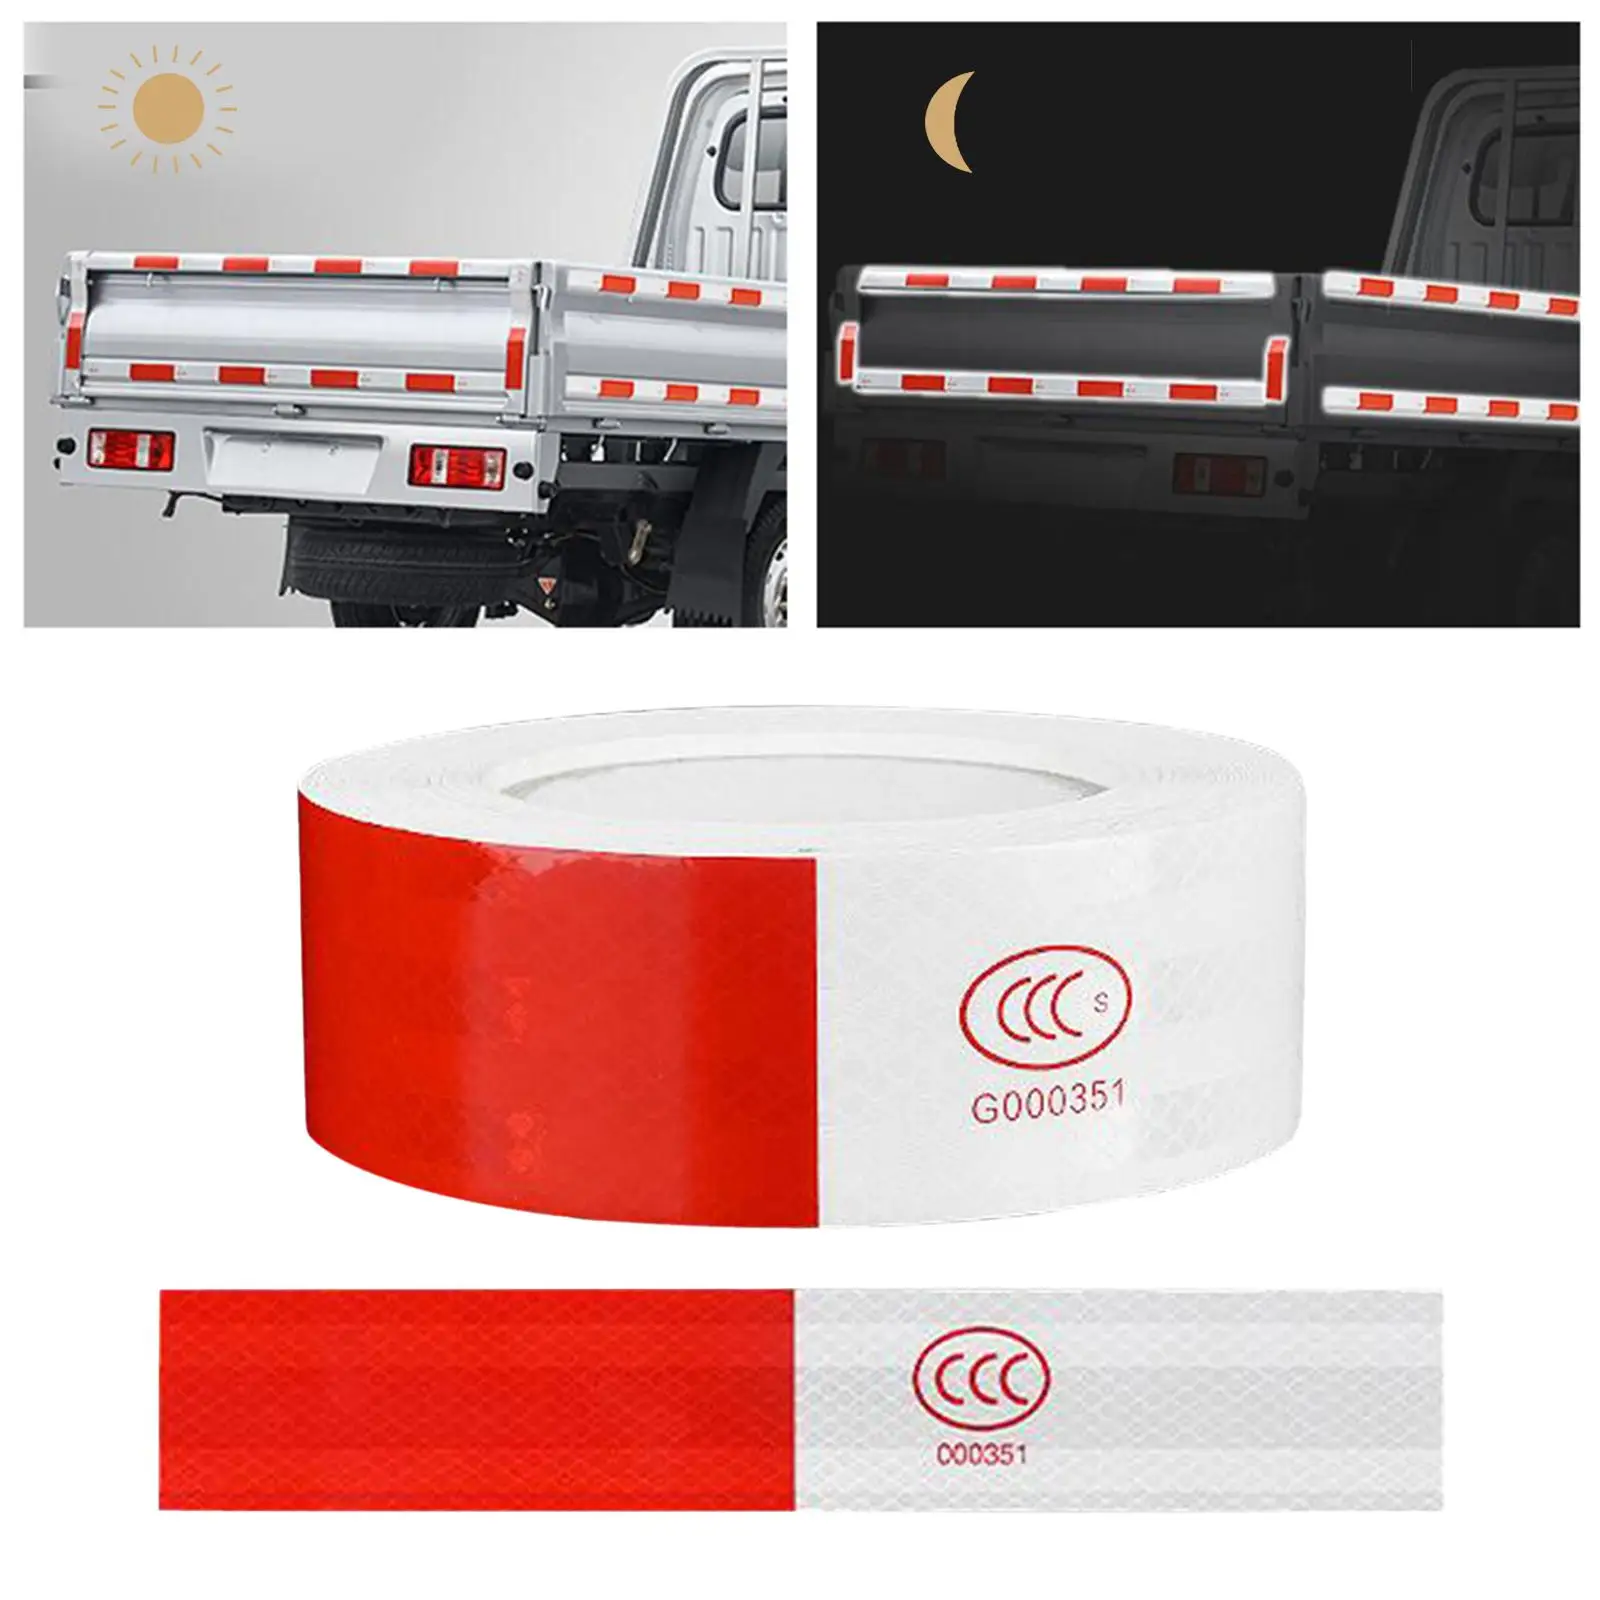 5cm*2800cm Car Reflective Tape Safety Warning Car Decoration Sticker Reflector Protective Tape Film Auto Motorcycle Sticker